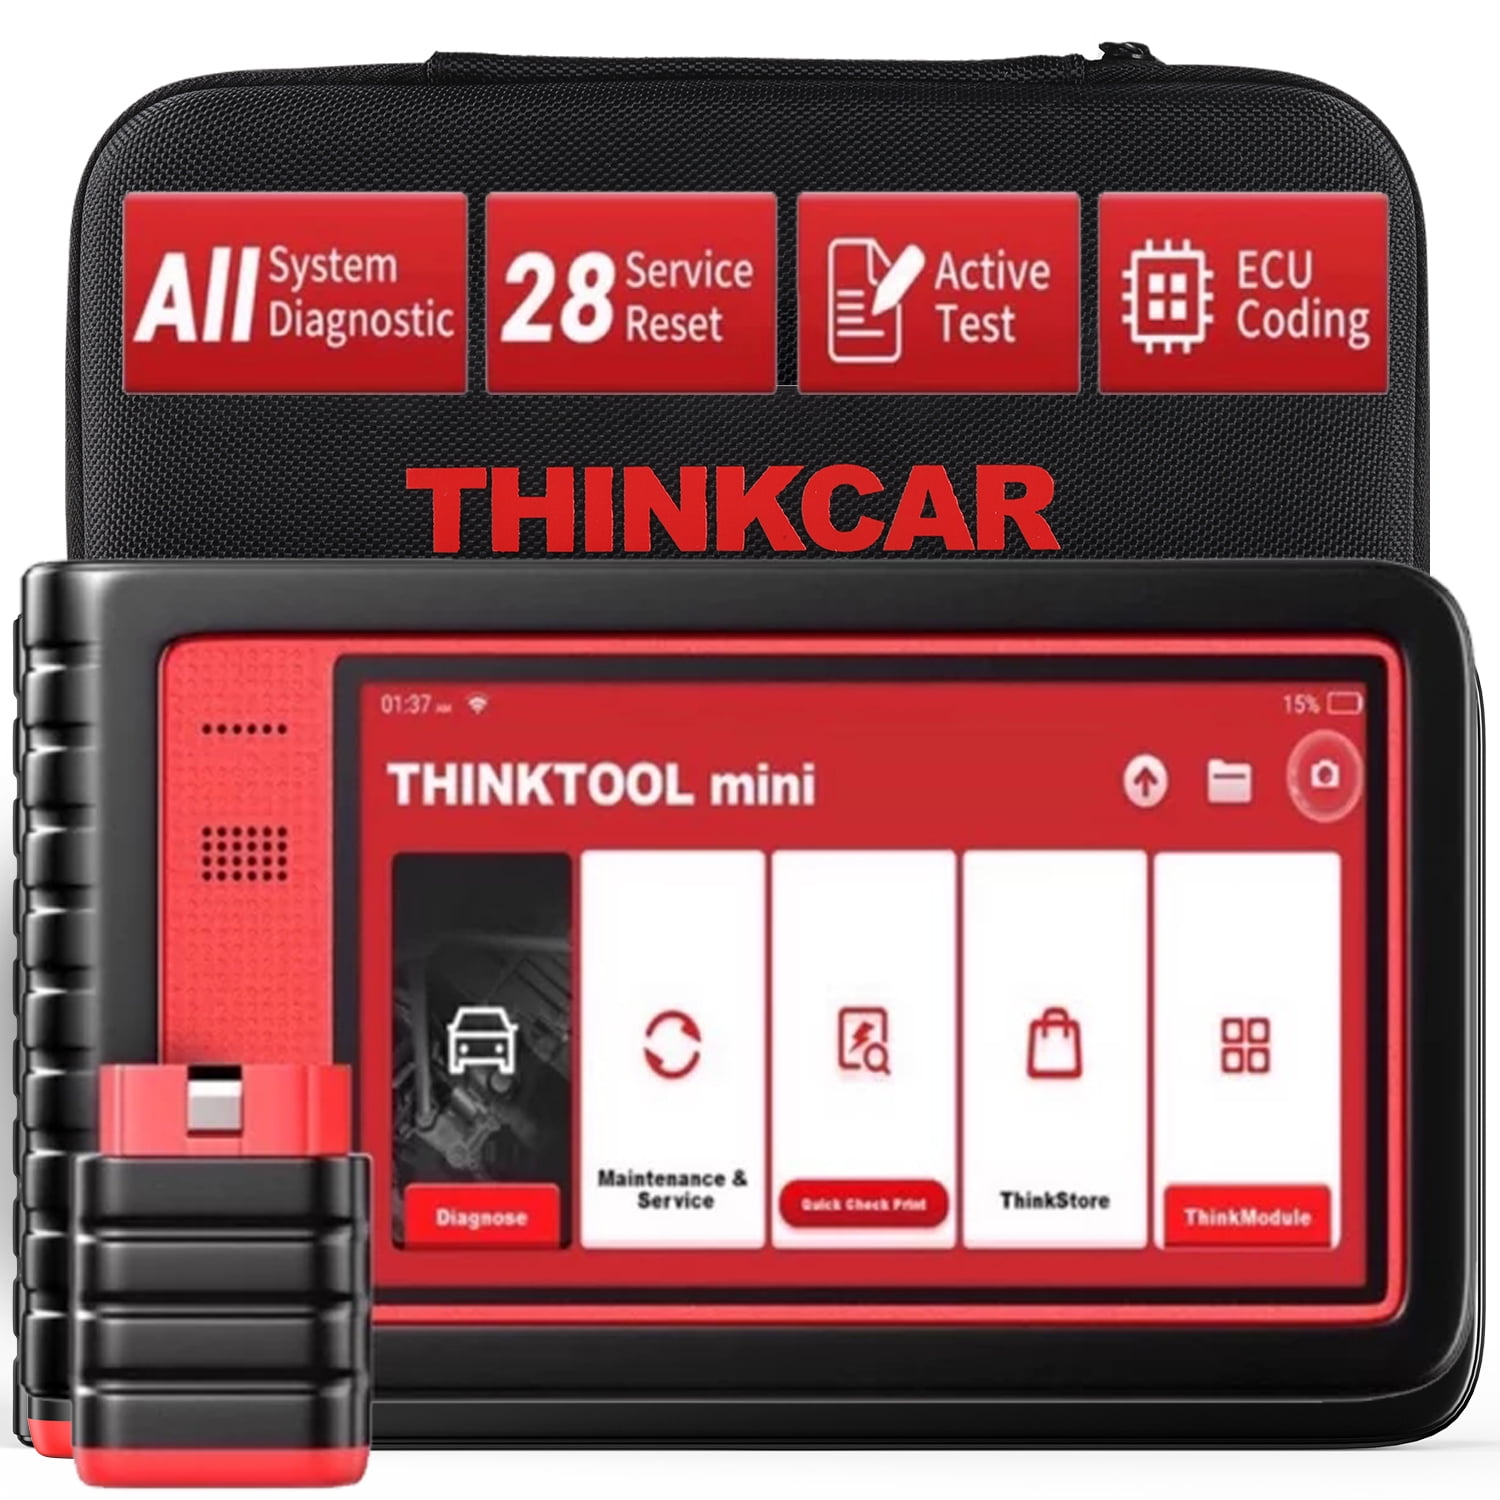 THINKCAR THINKTOOL Deluxe OBD2 Scanner Kit - Black, Polycarbonate Material  - Covers 99% of Vehicles - Maintenance Resets - Automatic VIN ID in the Auto  Diagnostic & Testing Tools department at